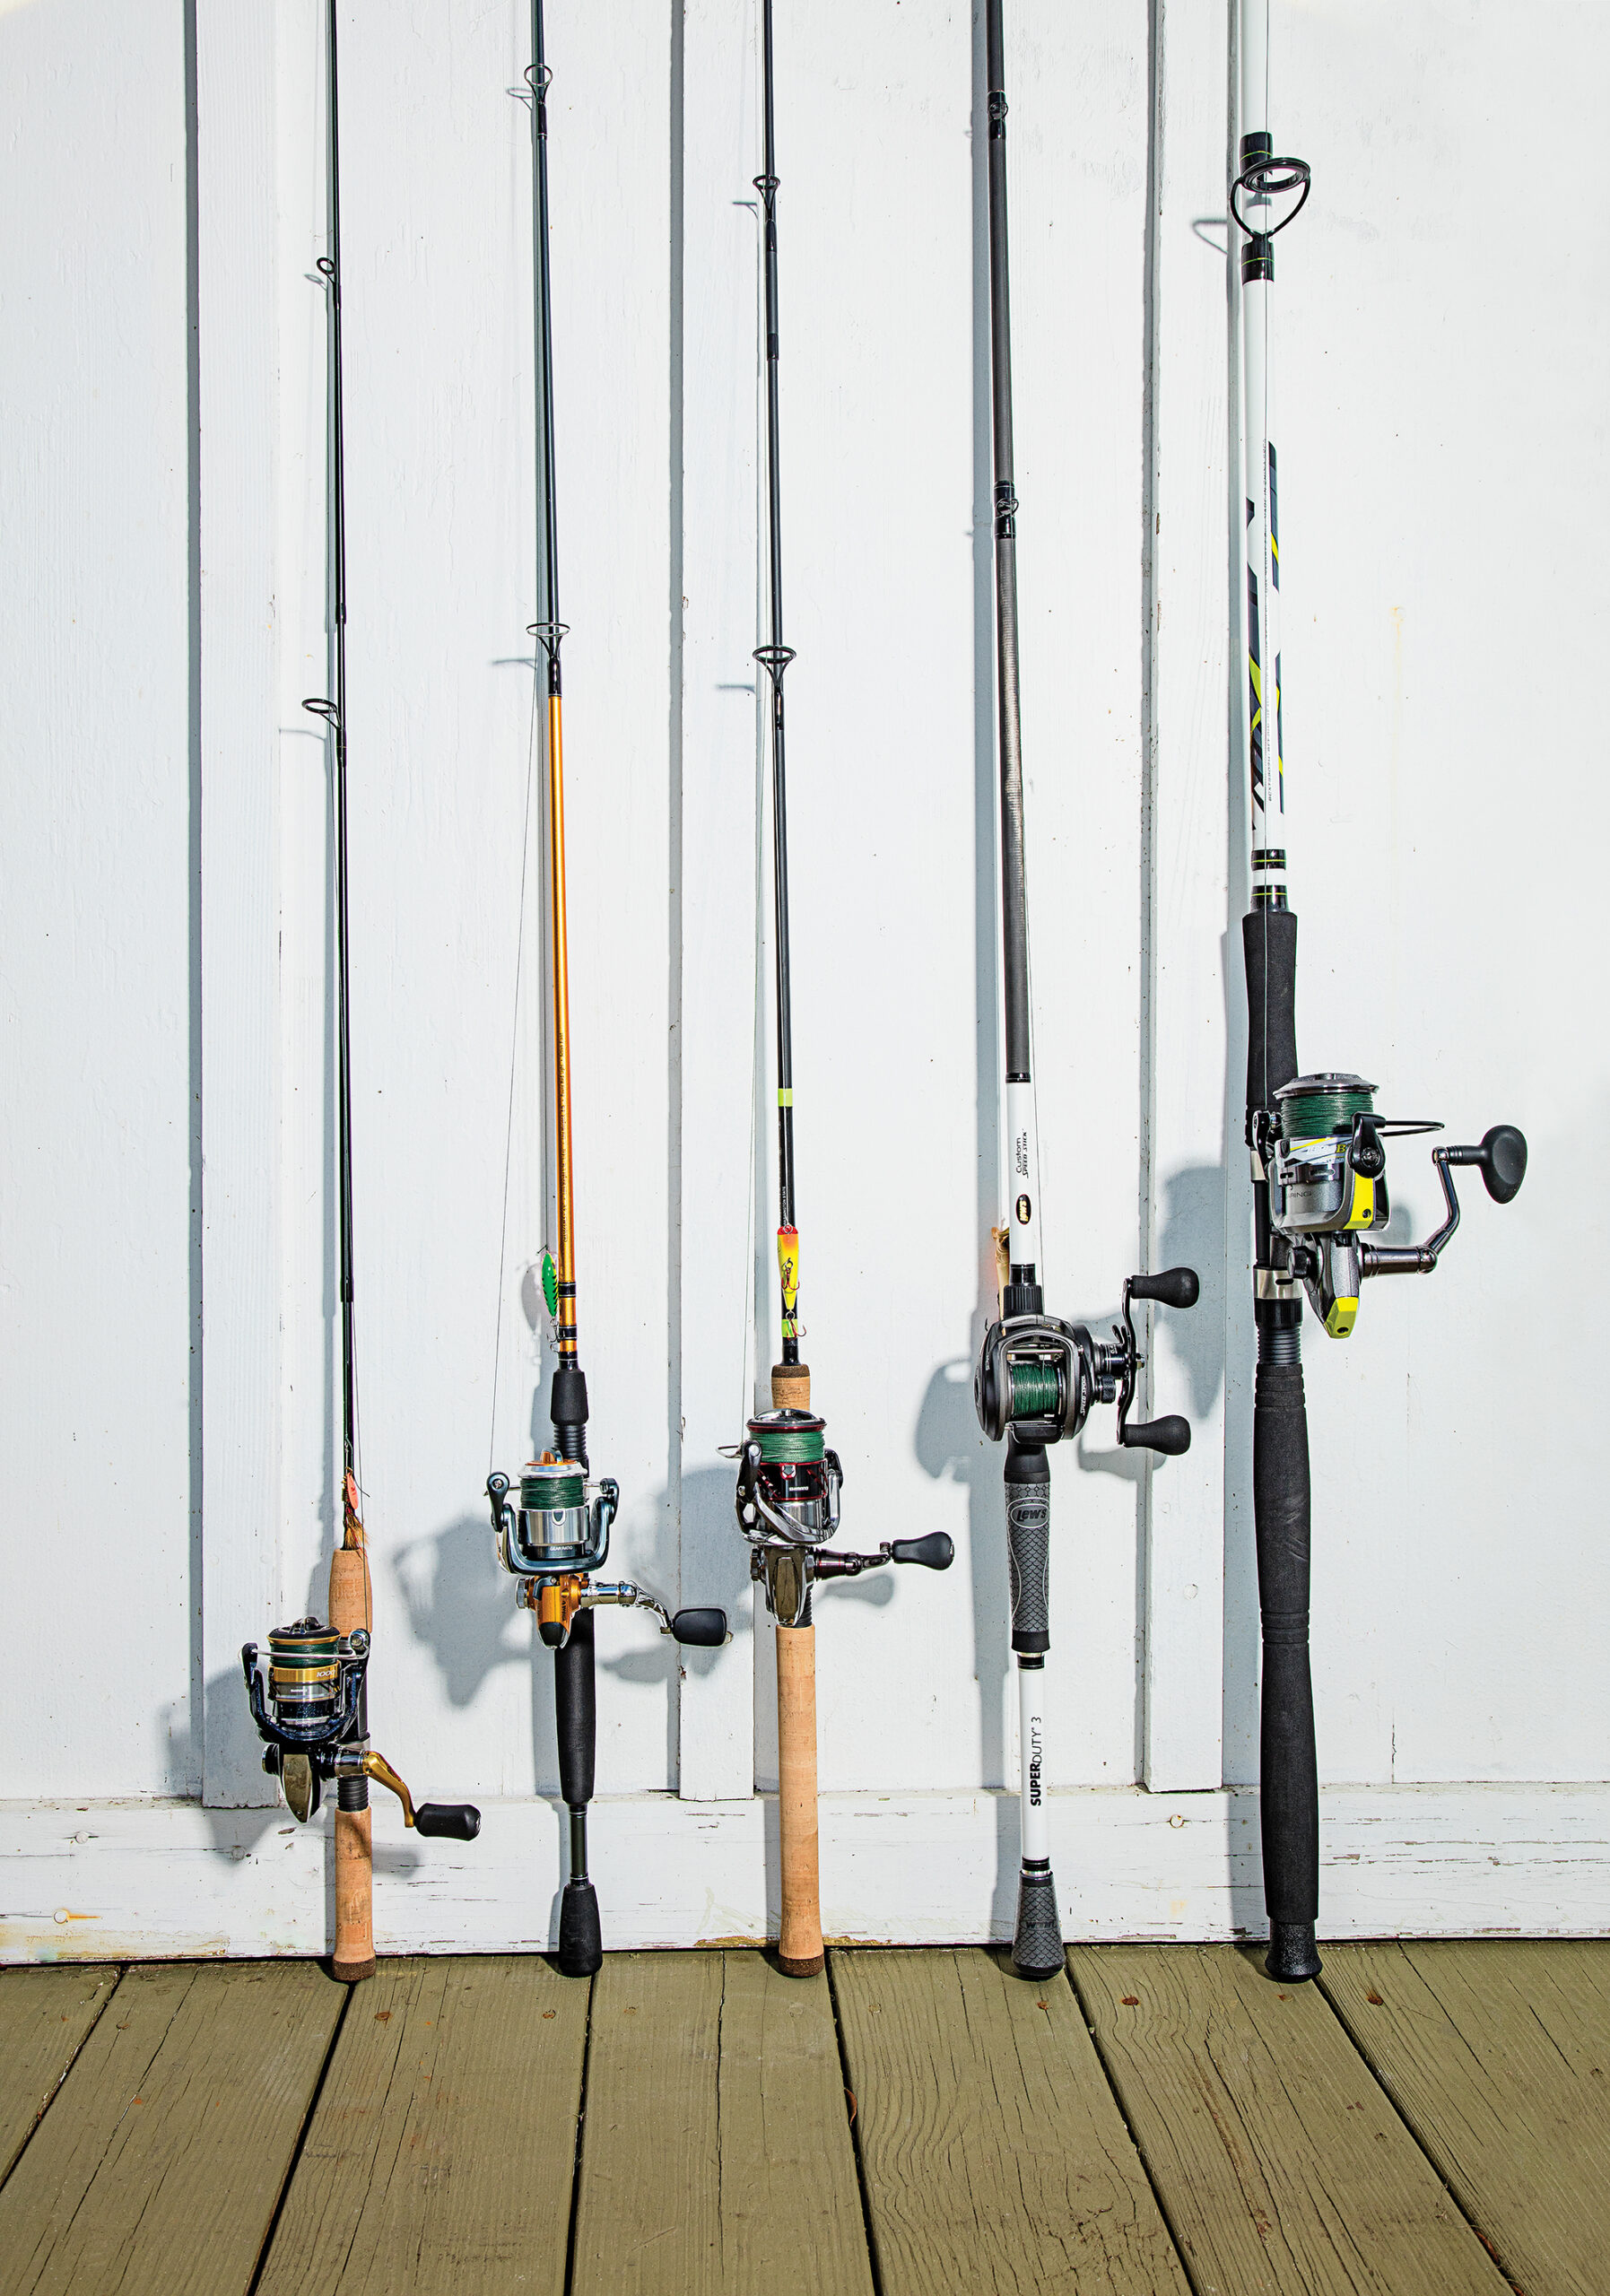 Super rod and reel combos.